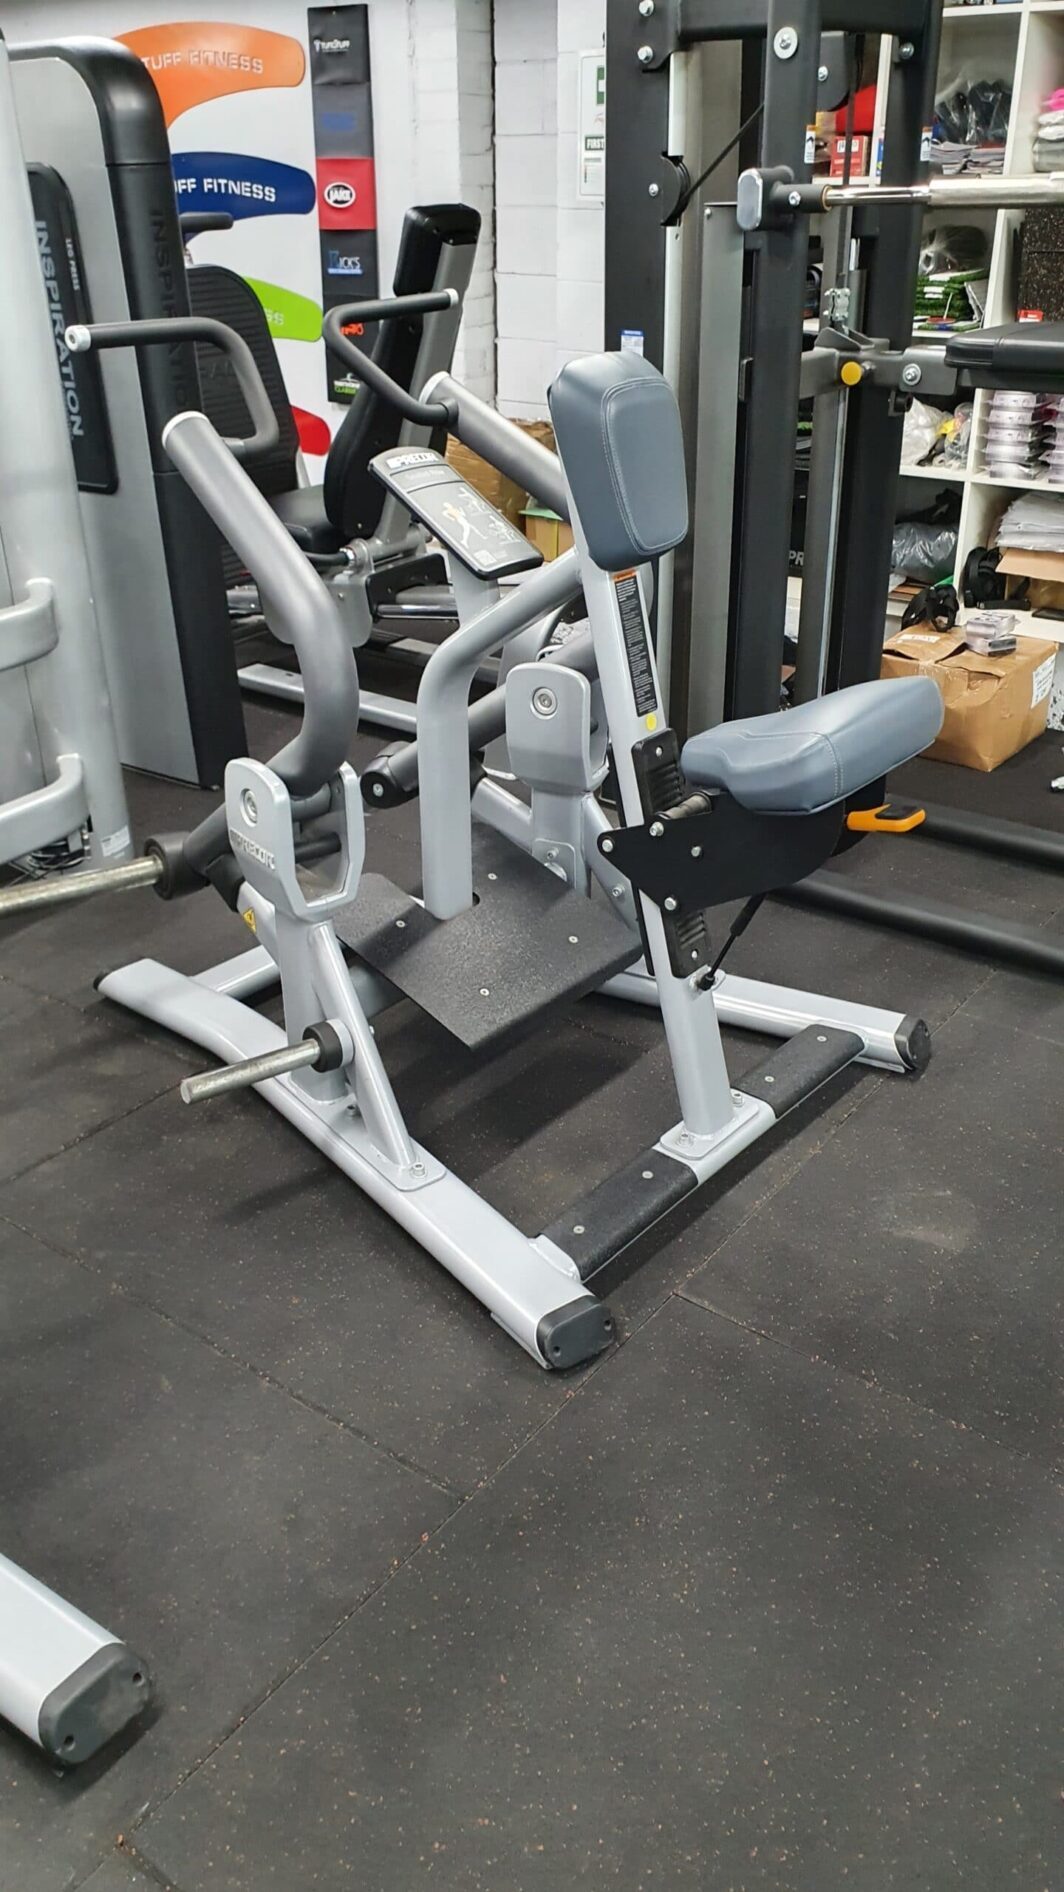 Precor Discovery Plated Loaded Seated Row second hand gym equipment